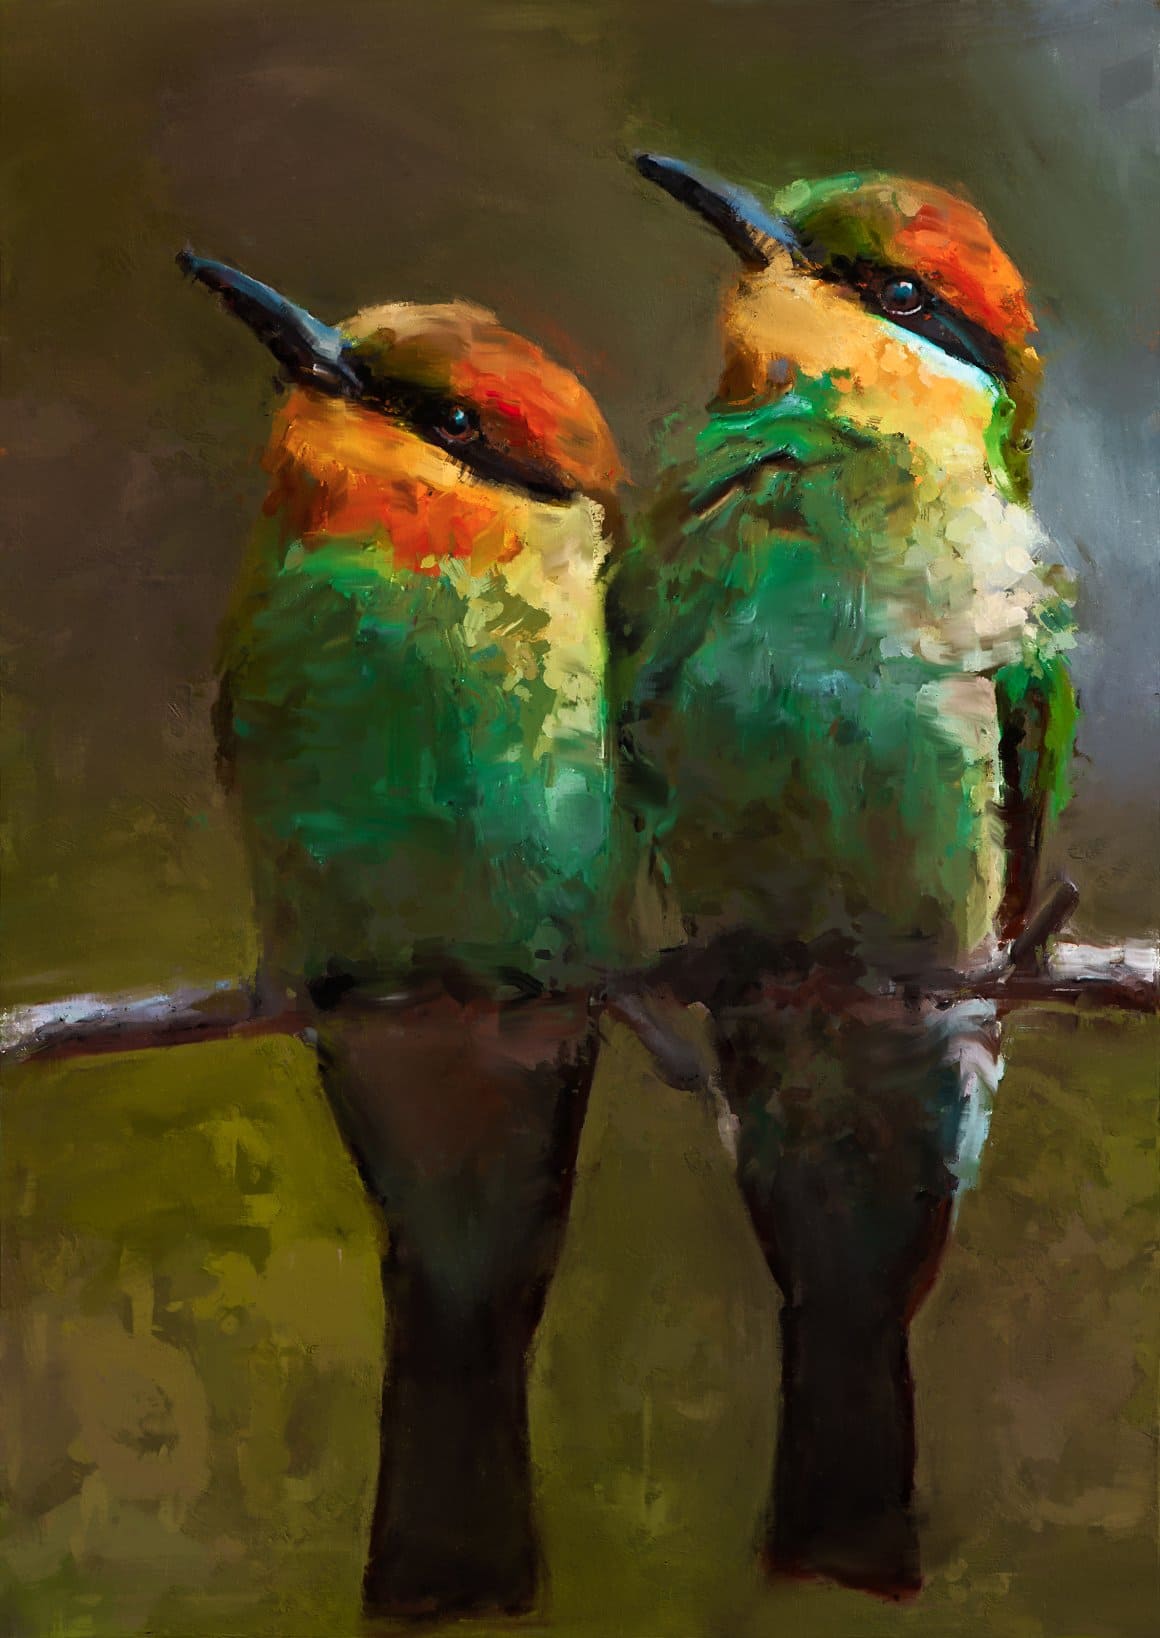 Two colored birds with Painted Photoshop Effect.